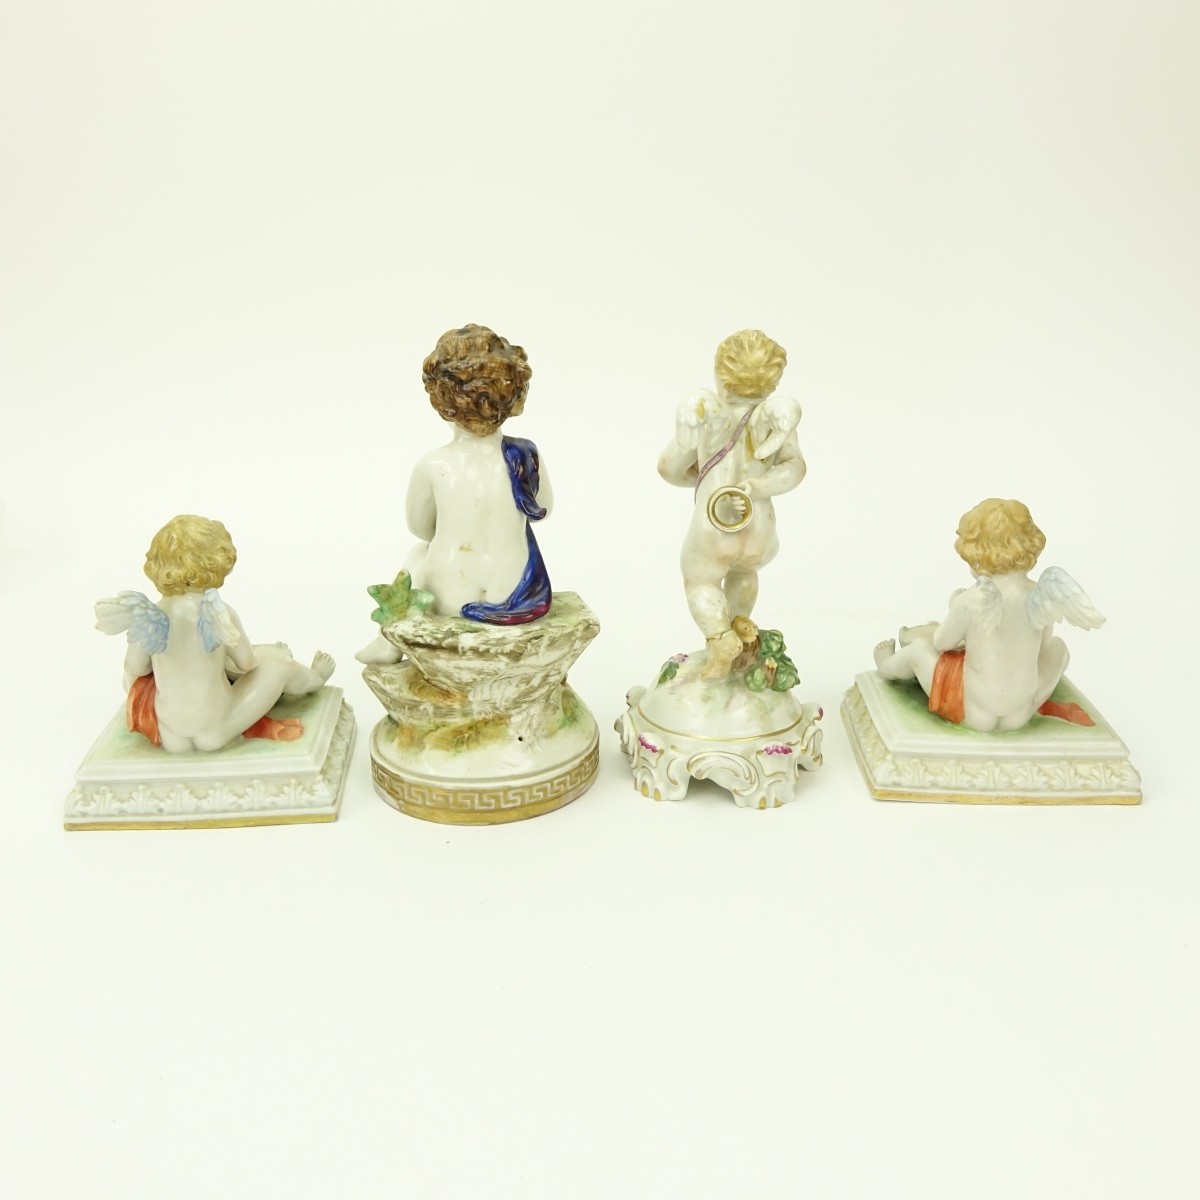 Grouping of Four (4) Antique Porcelain Figurines